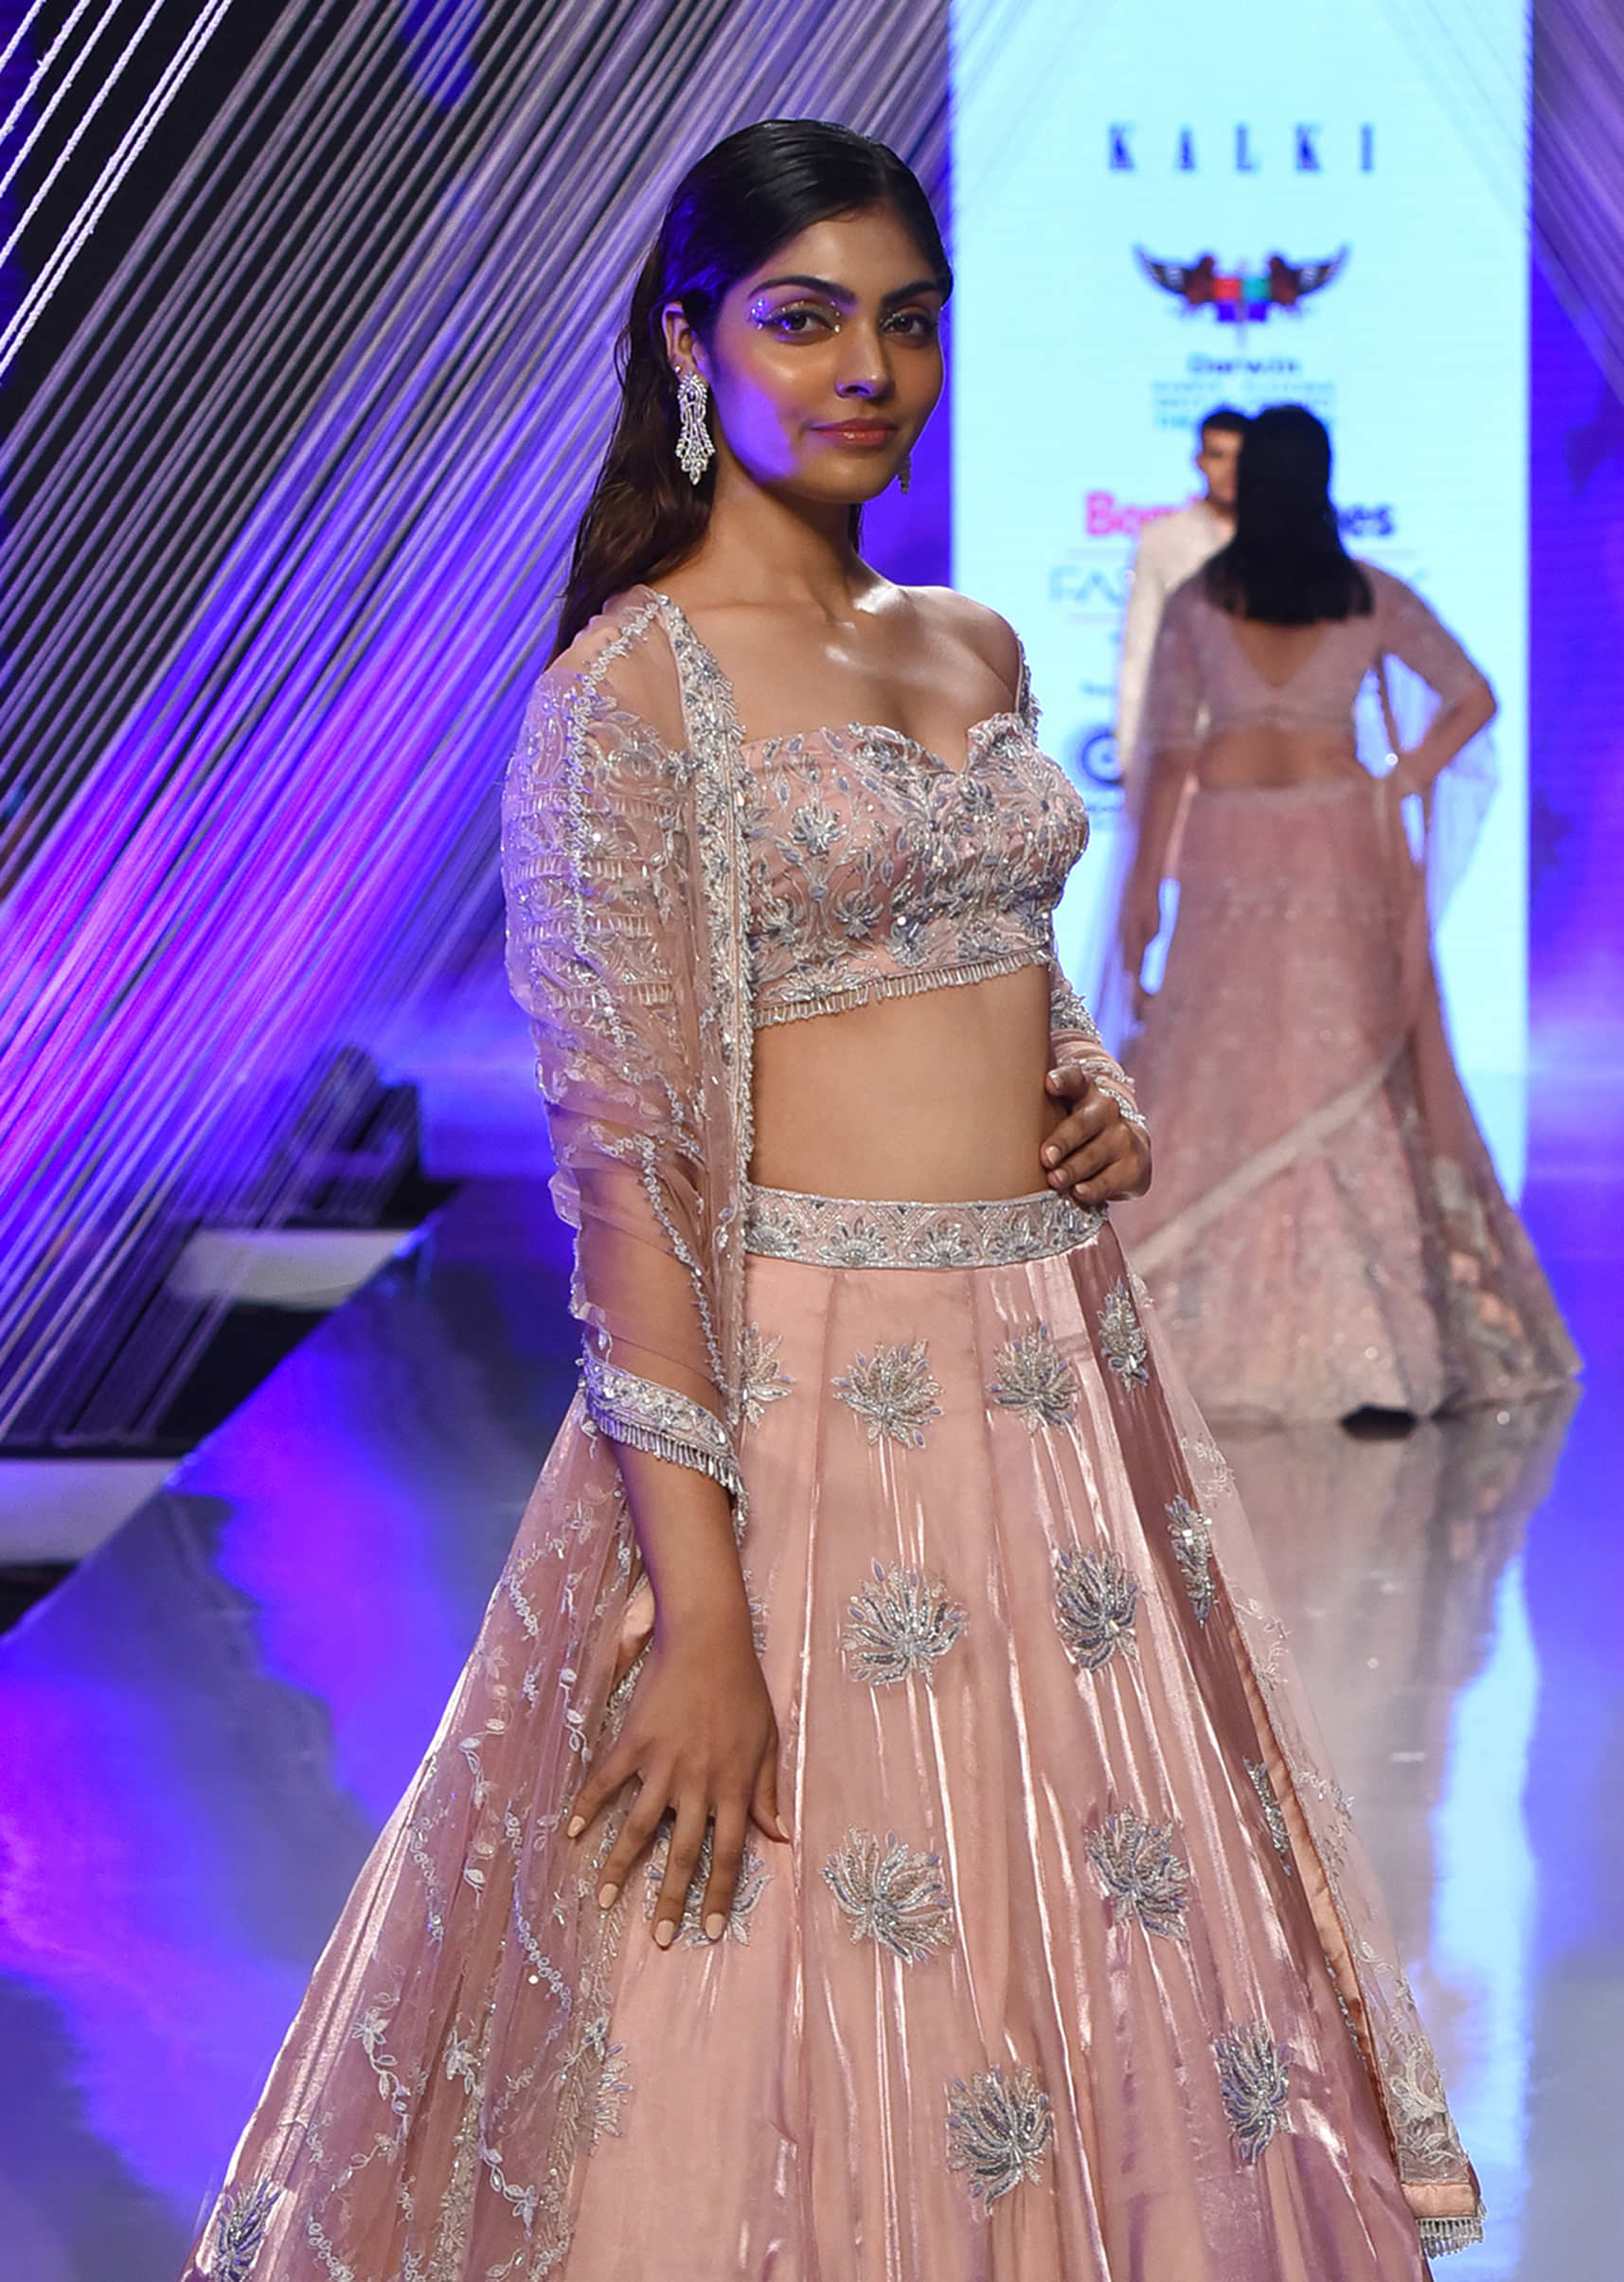 Powder Pink Lehenga And Off Shoulder Crop Top In 3D Floral Motifs Embroidery, Matching Net Dupatta With Stone Fringes